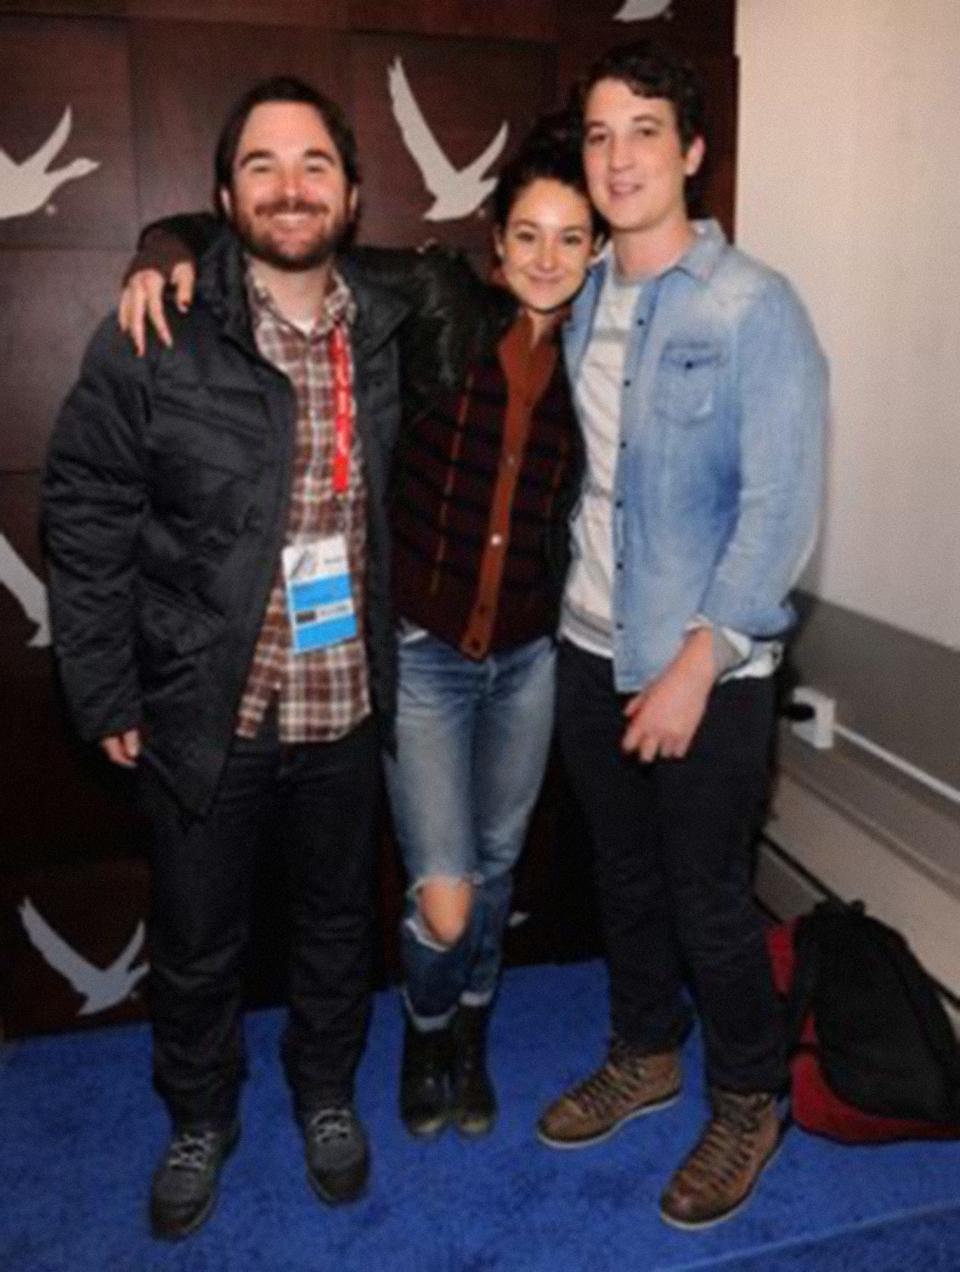 (L-R) "The Spectacular Now" writer-director James Ponsoldt with stars Shailene Woodley and Miles Teller at the Sundance Film Festival premiere in 2013. Ponsoldt, who is from Athens, Ga., shot the entire movie in town.